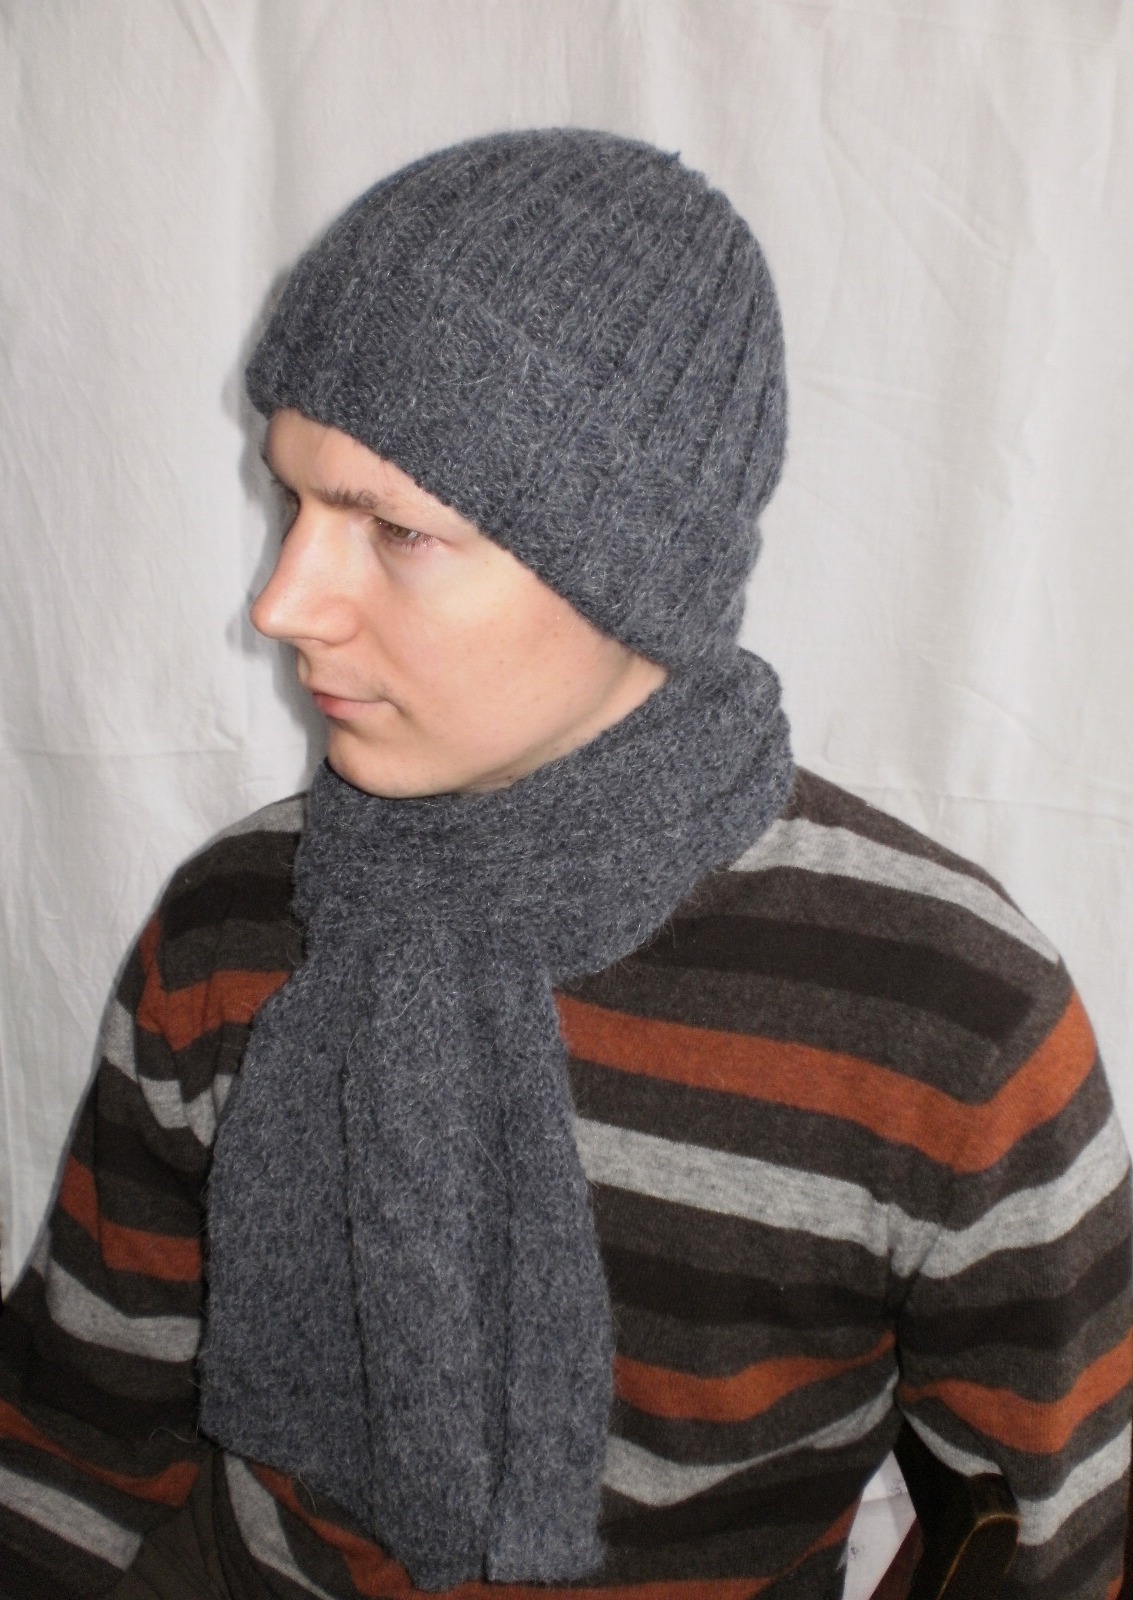 Stitching my comeback: Man's hats and scarf